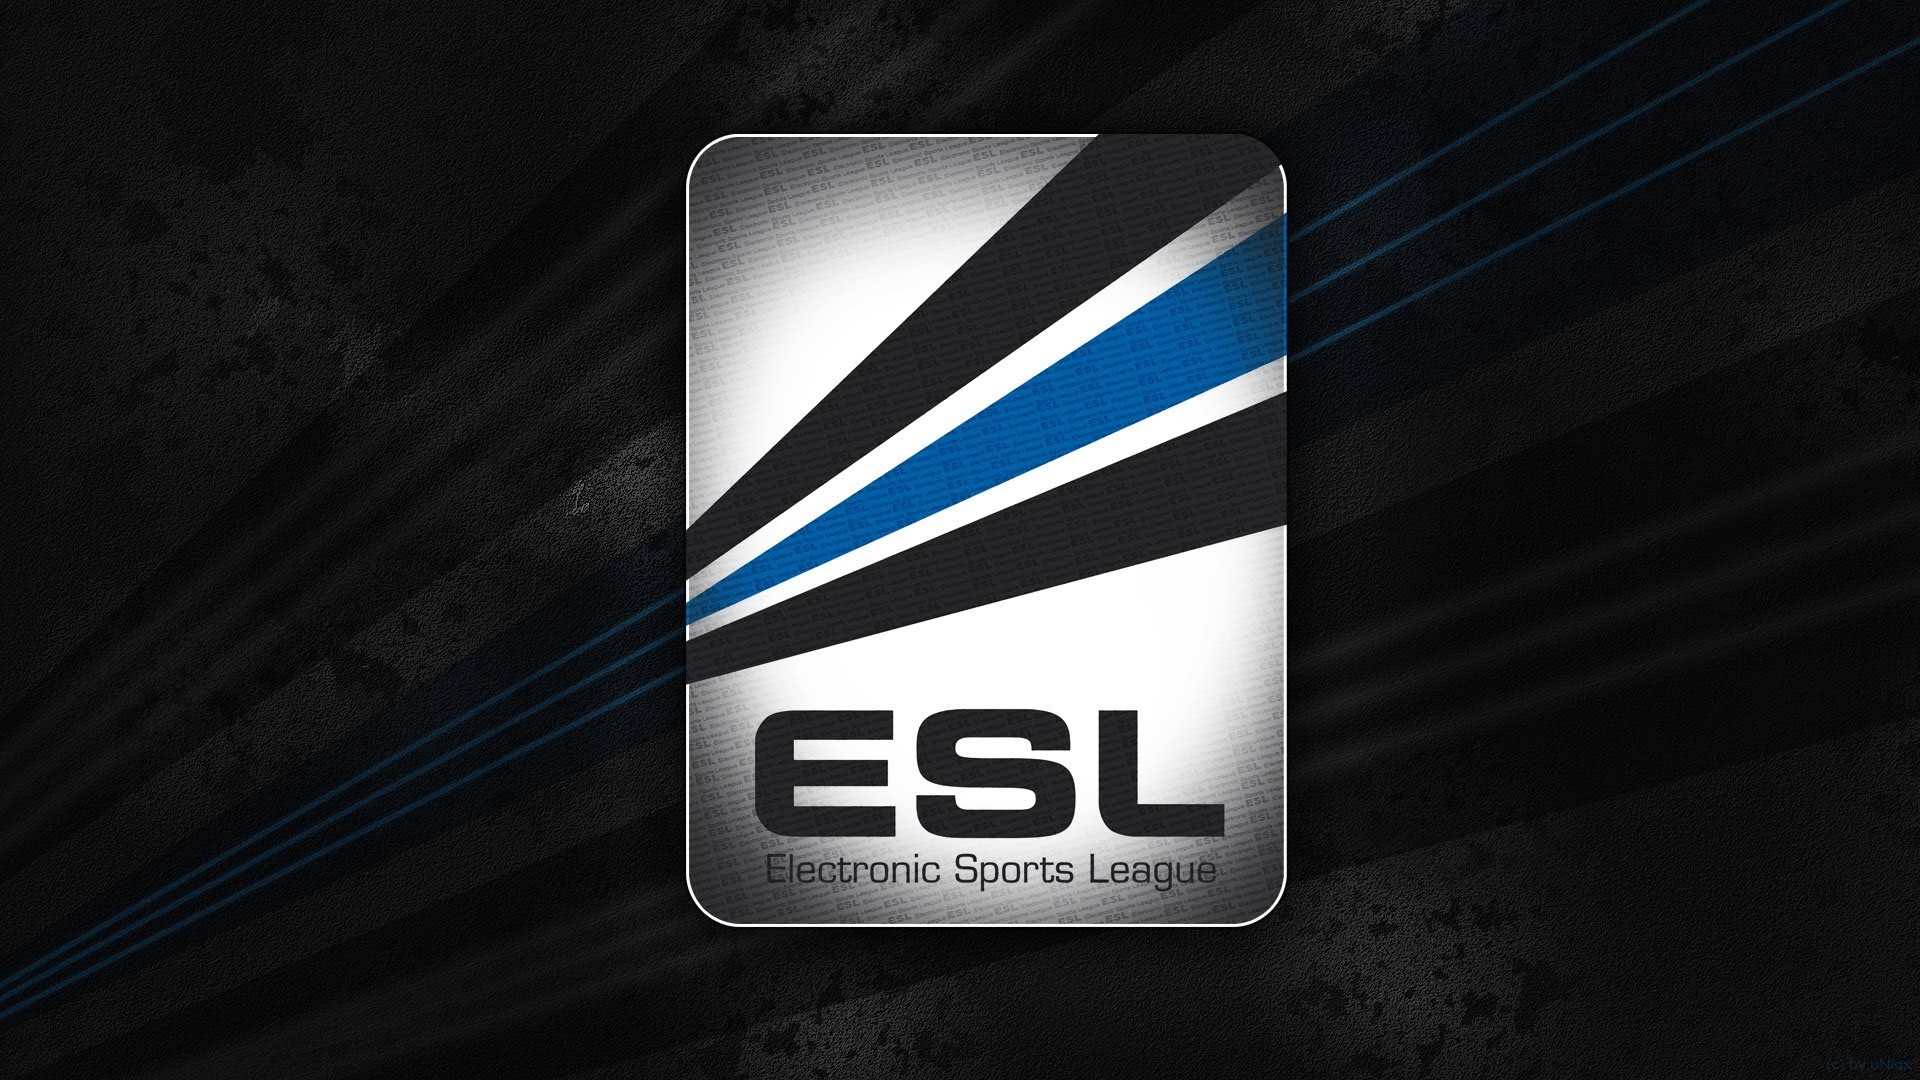 General 1920x1080 Electronic Sports League logo lines PC gaming